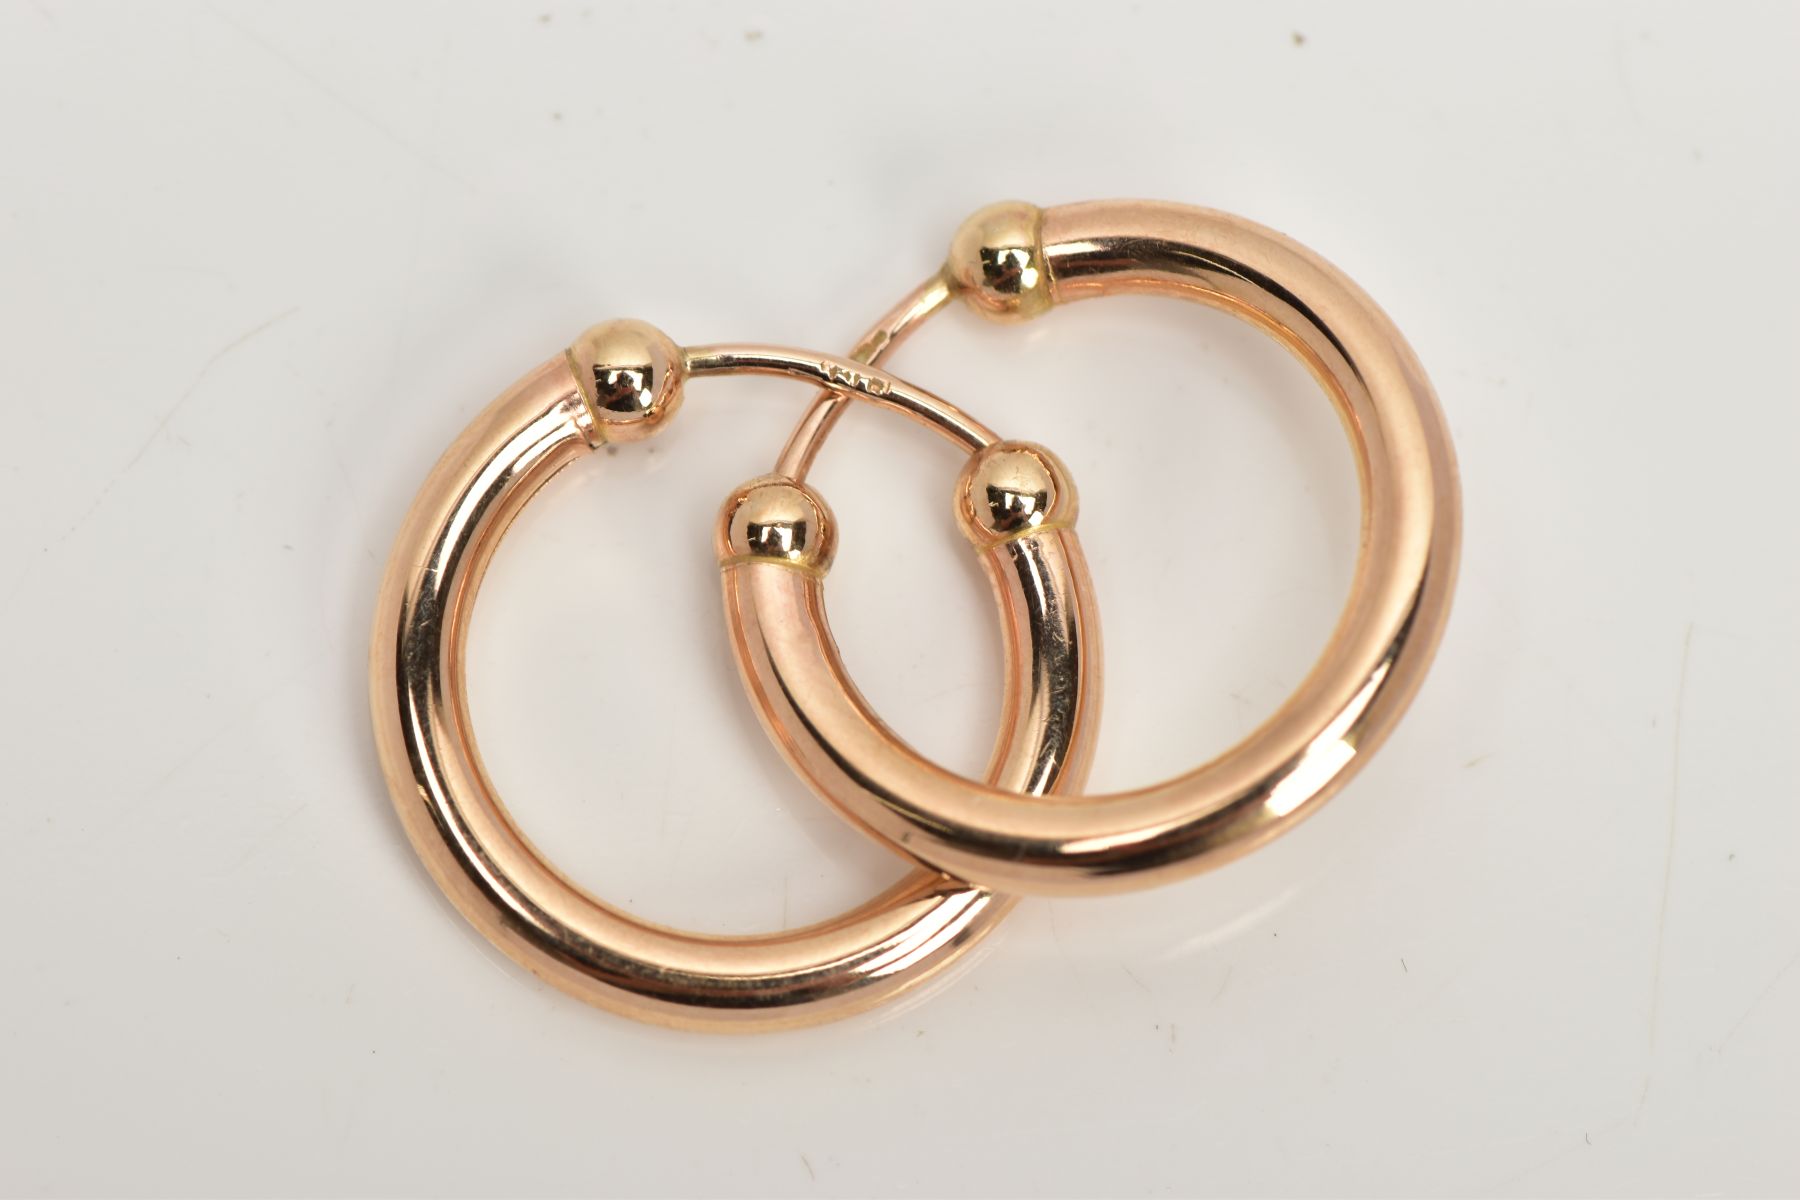 A PAIR OF 9CT GOLD EARRINGS, each hollow ear hoop of plain polished design with spherical bead